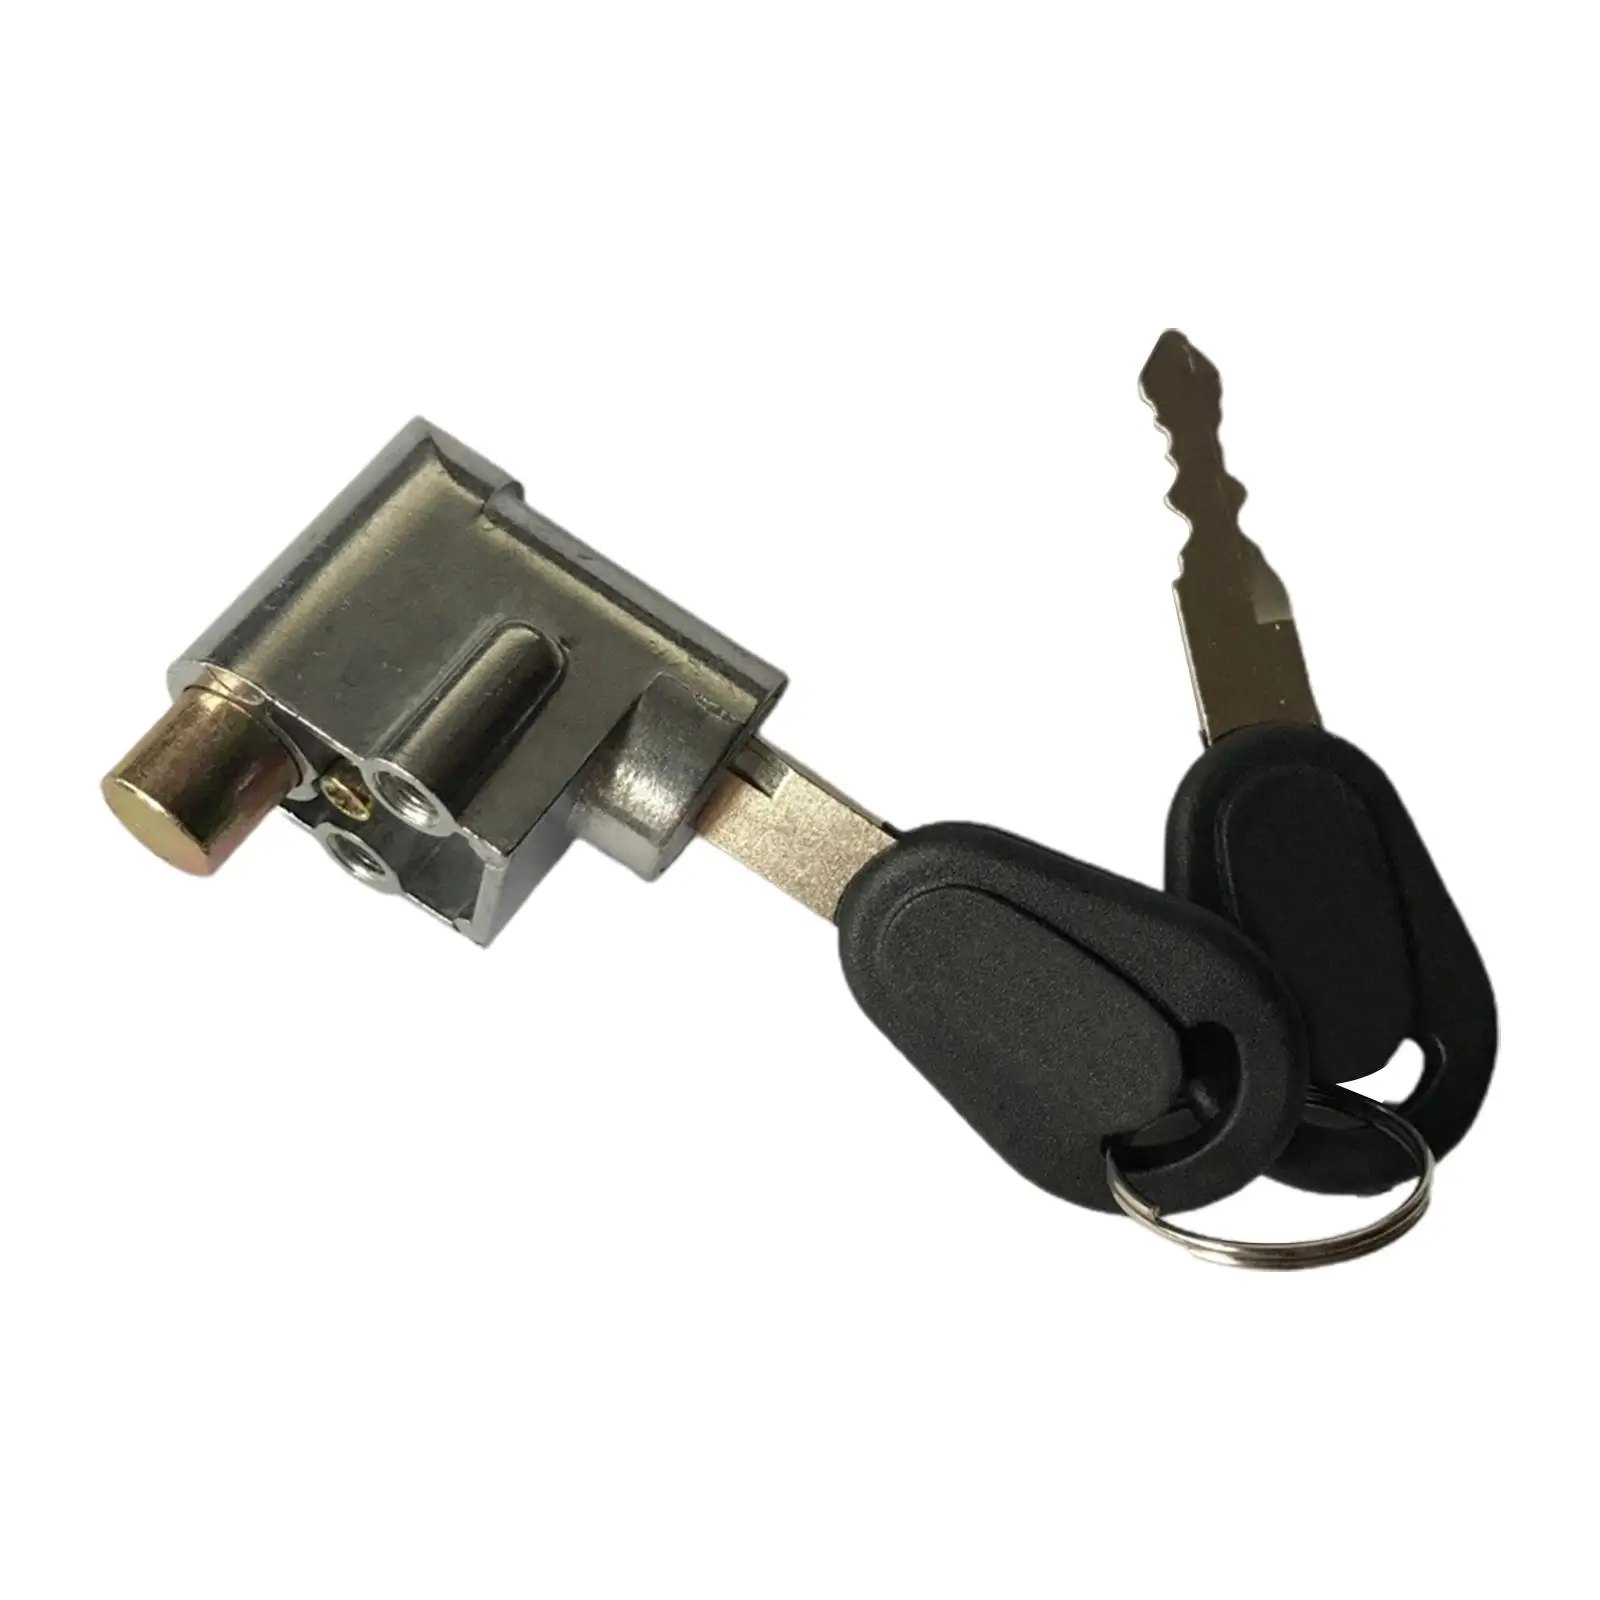 Motorcycle Ignition Lock for Electric Bike Portable Battery Cylinder Lock